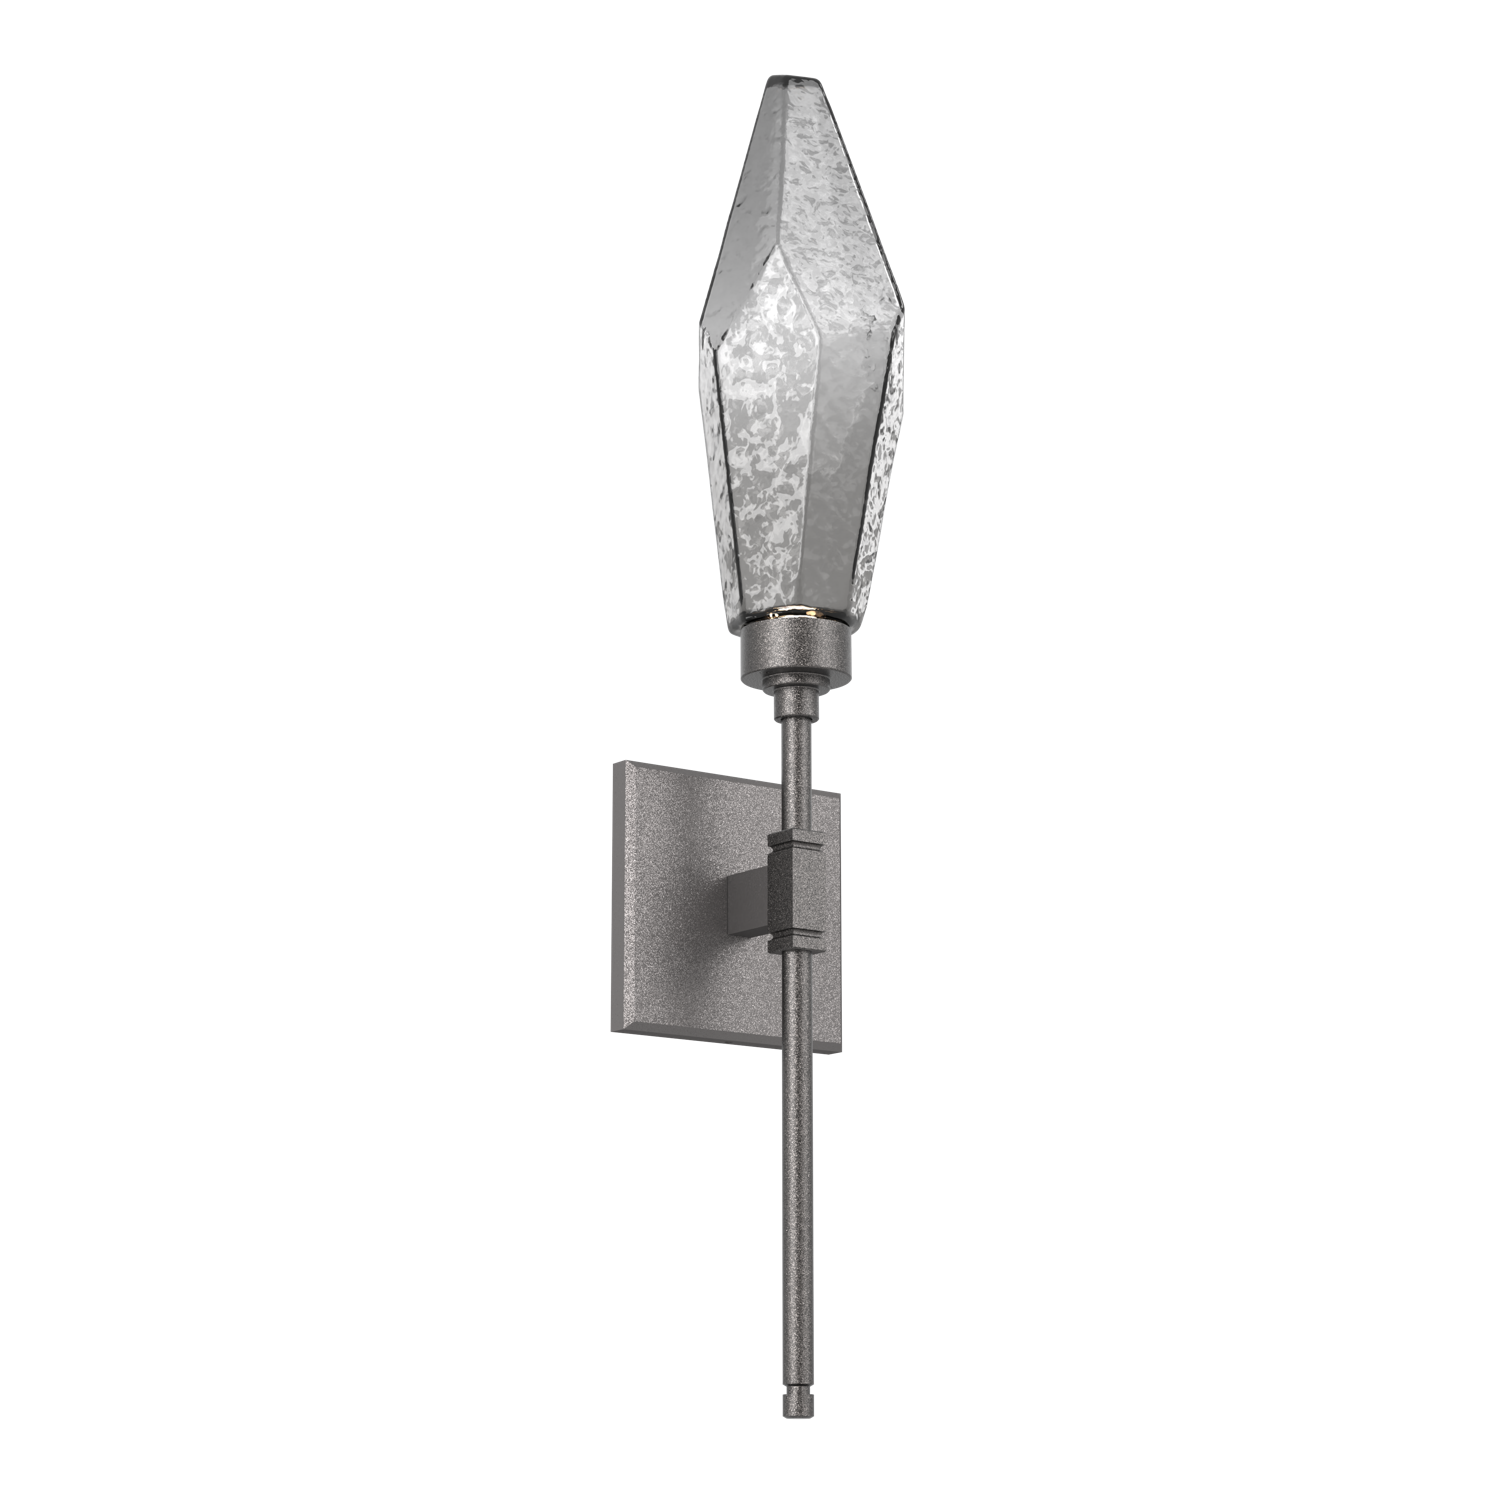 IDB0050-04-GP-CS-Hammerton-Studio-Rock-Crystal-ada-certified-belvedere-wall-sconce-with-graphite-finish-and-chilled-smoke-glass-shades-and-LED-lamping